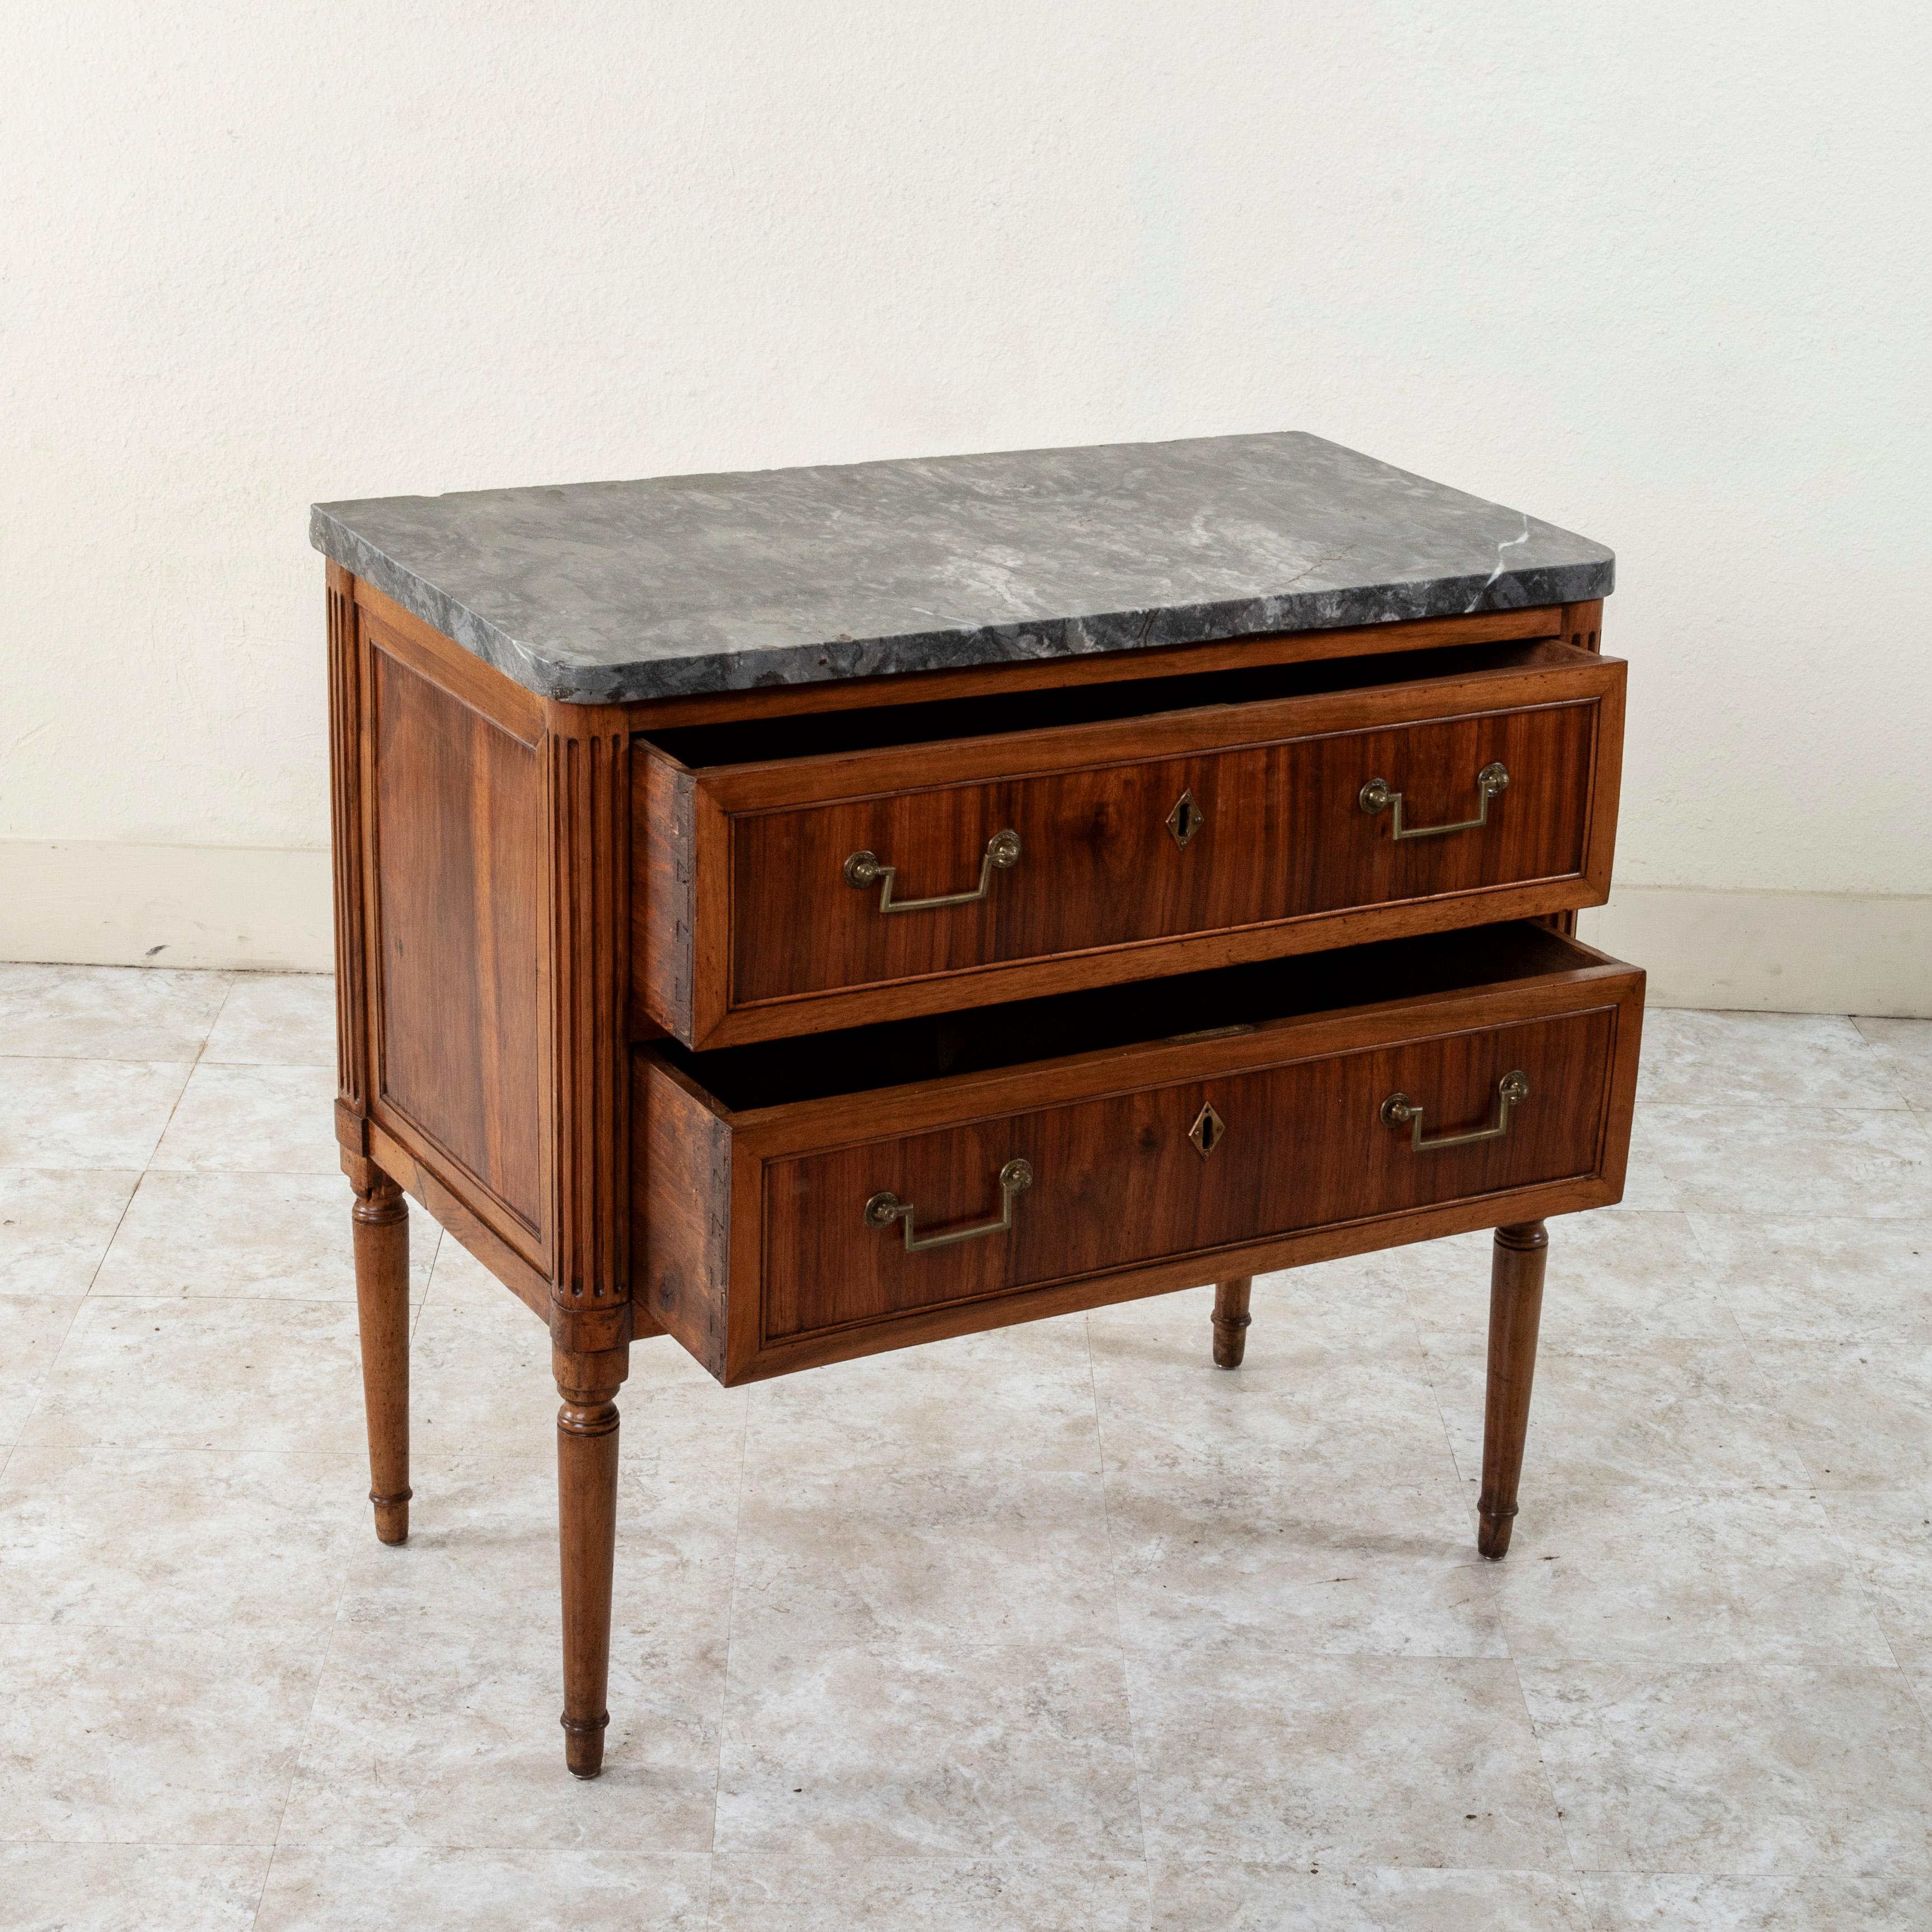 Small Scale Late 18th Century French Louis XVI Period Walnut Chest, Marble Top For Sale 3